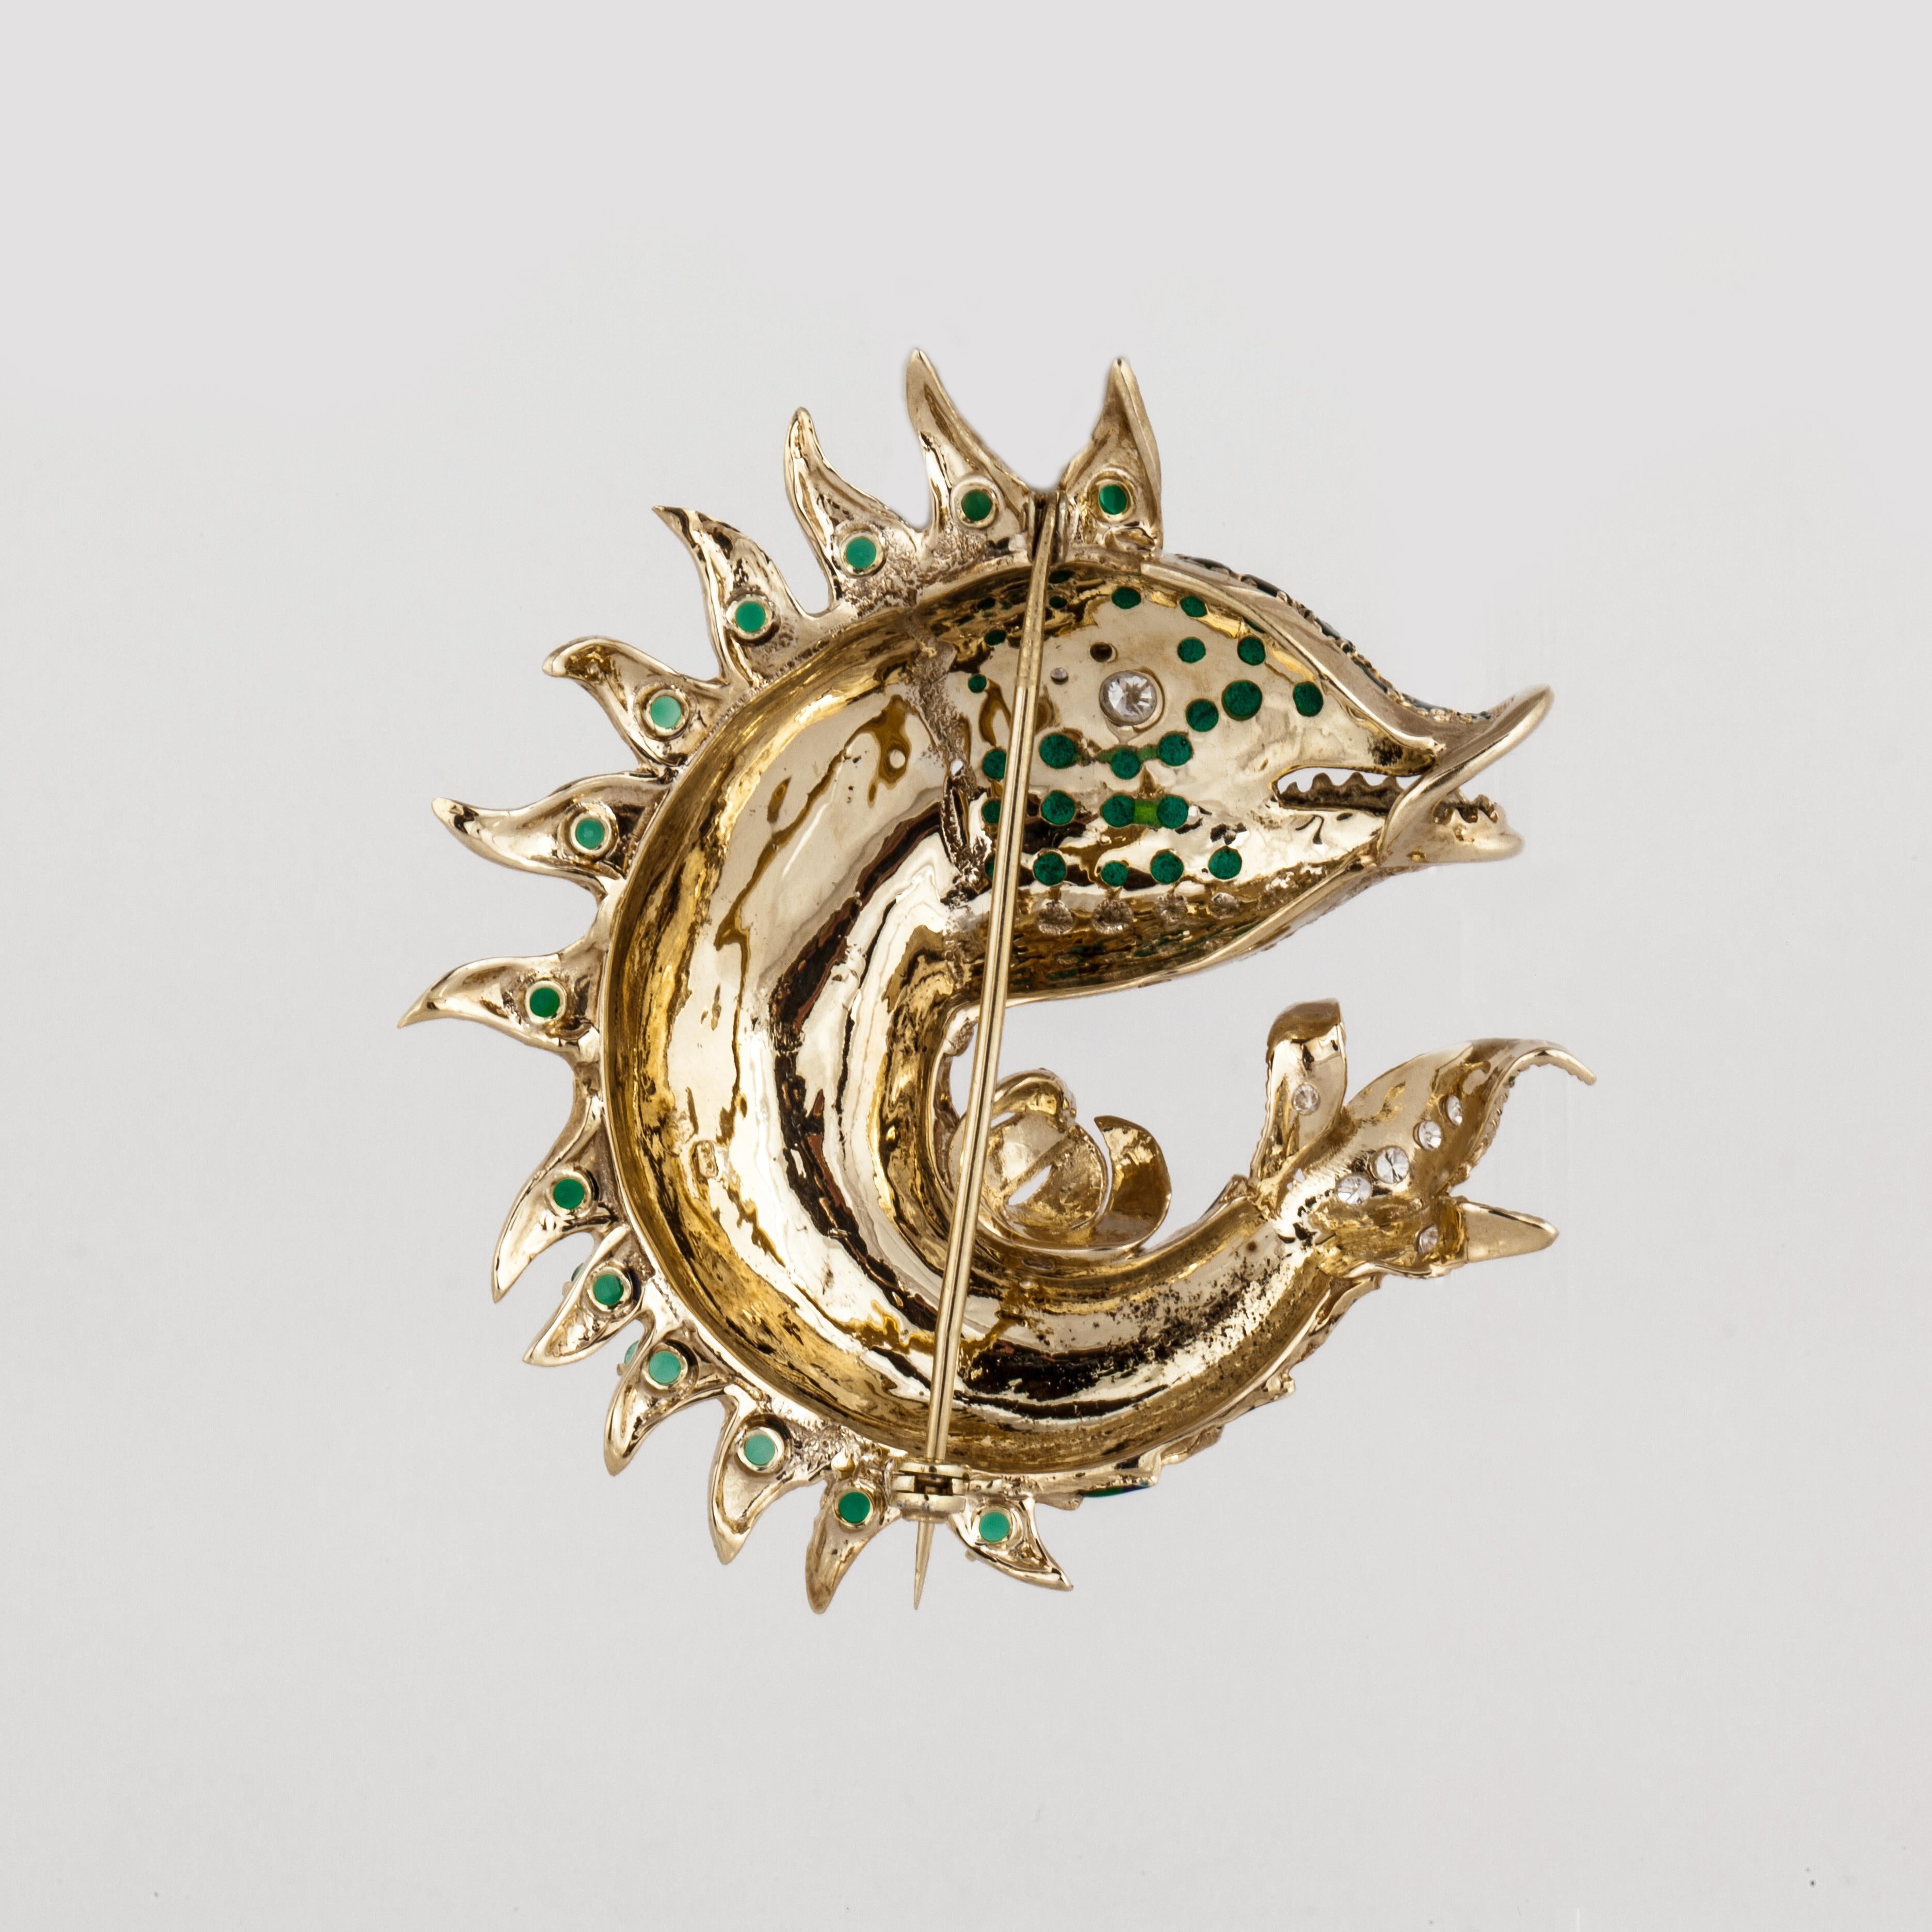 Plique-a-Jour Enamel Fish Brooch in 18K Gold In Good Condition For Sale In Houston, TX